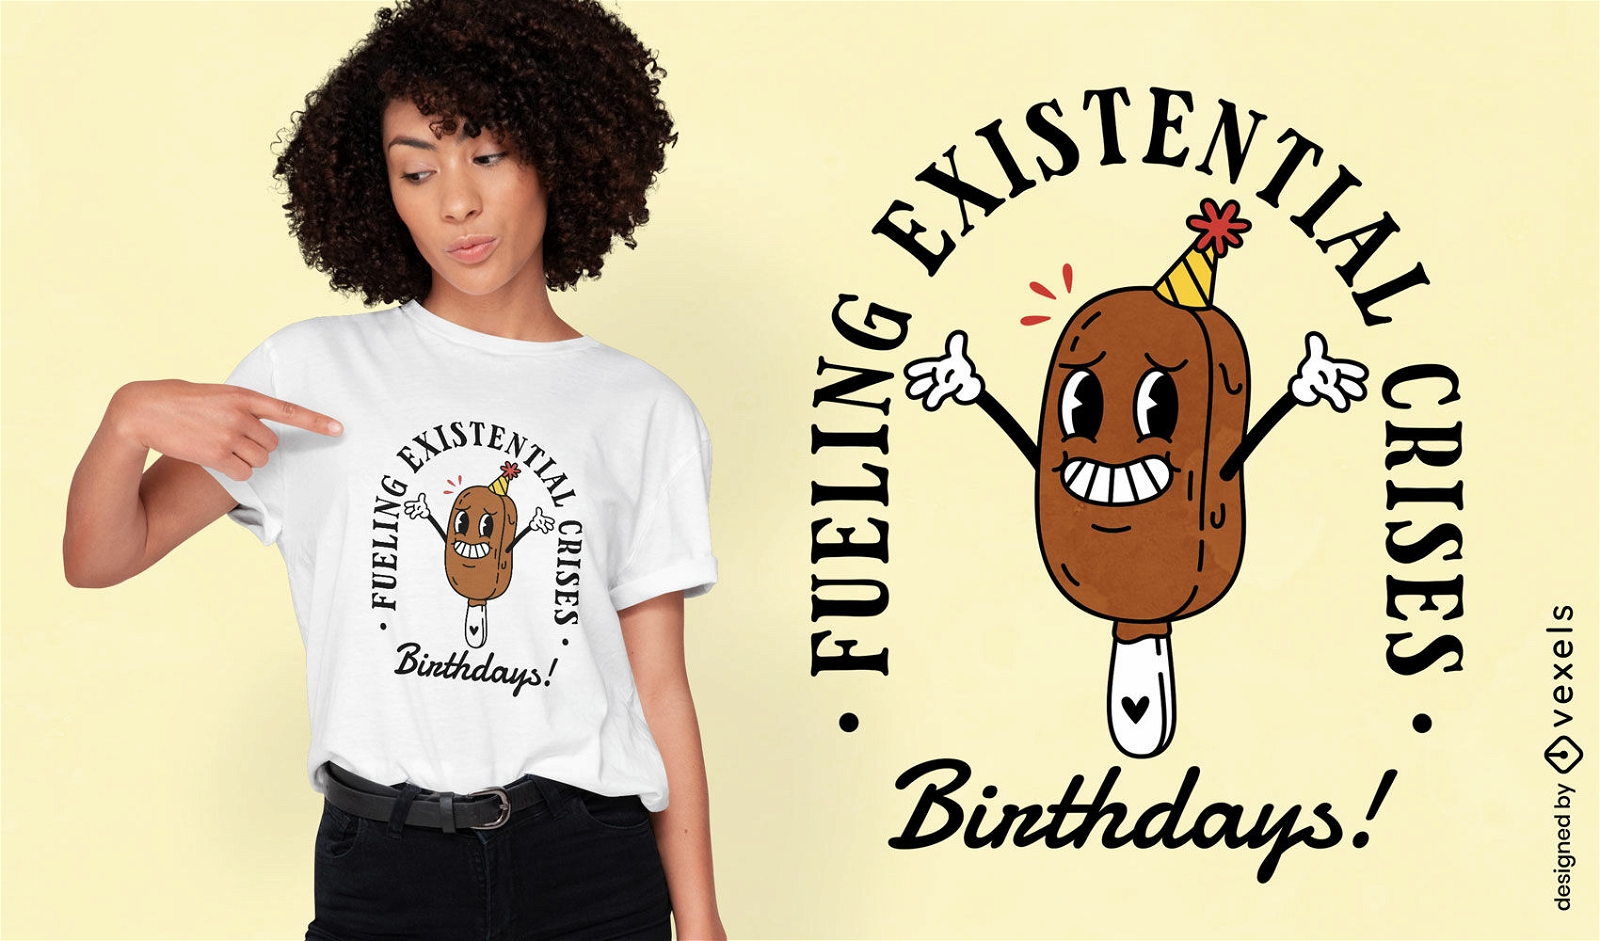 Thoughtful ice cream existential t-shirt design